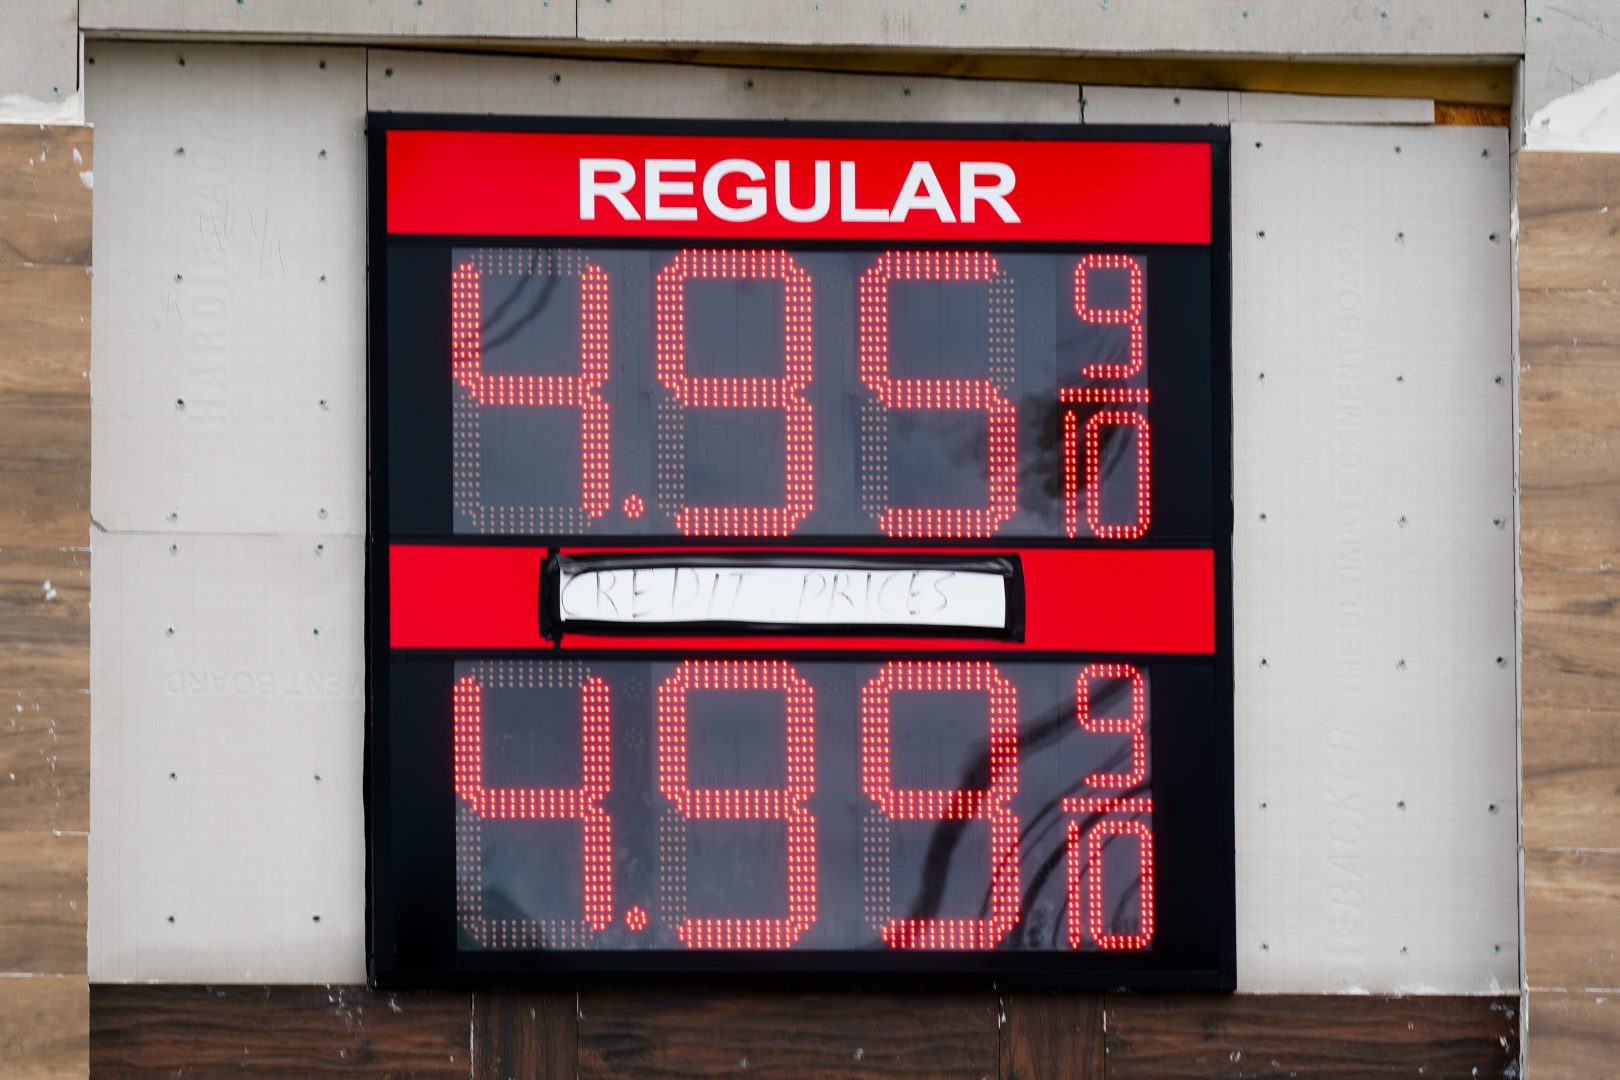 Gas prices are displayed at a filling station in Philadelphia, Thursday, June 16, 2022. 